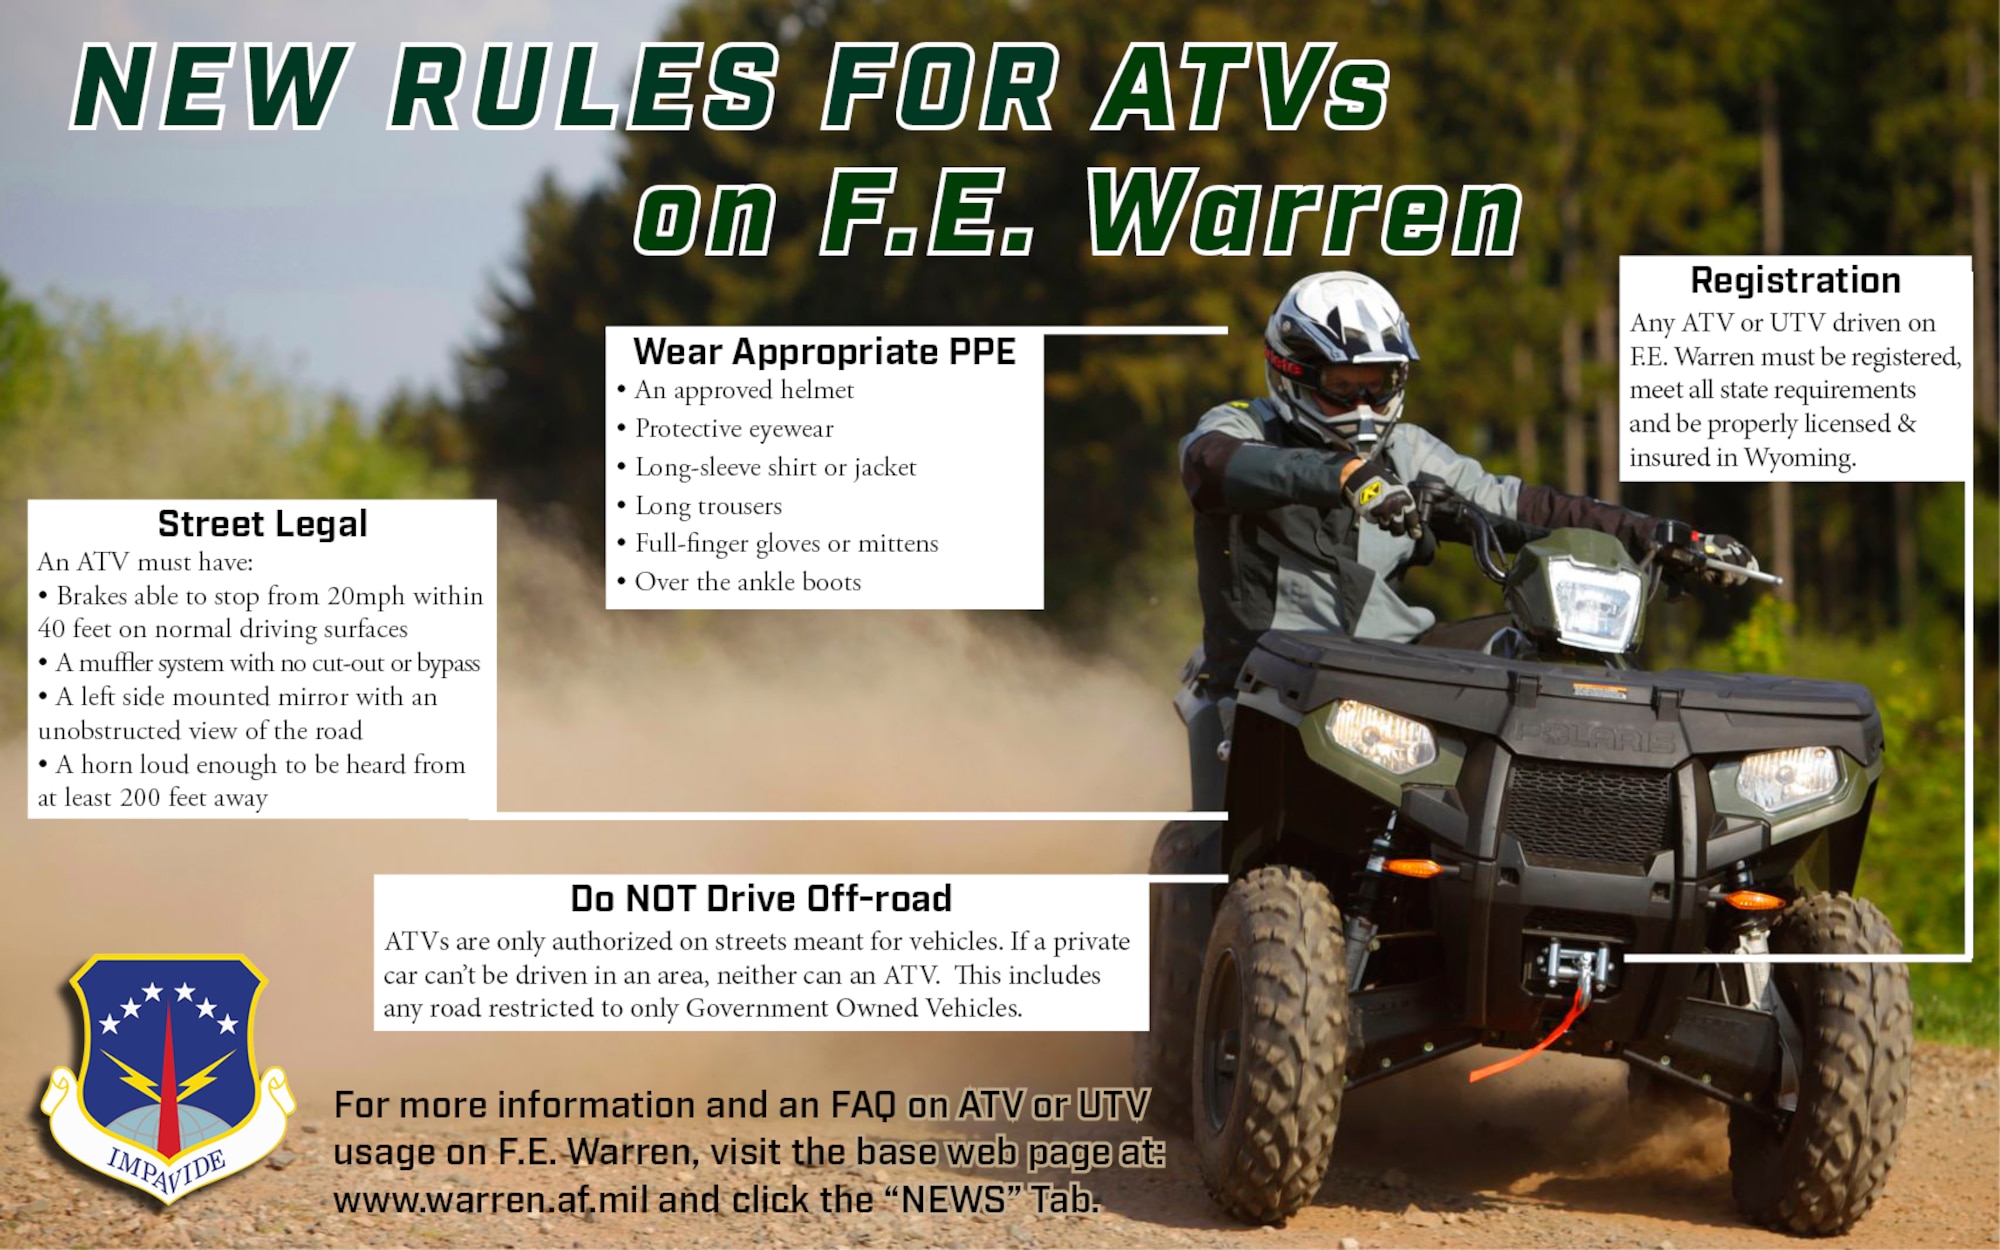 New rules for ATVs on F. E. Warren (U.S. Air Force graphic design by Glenn Robertson).